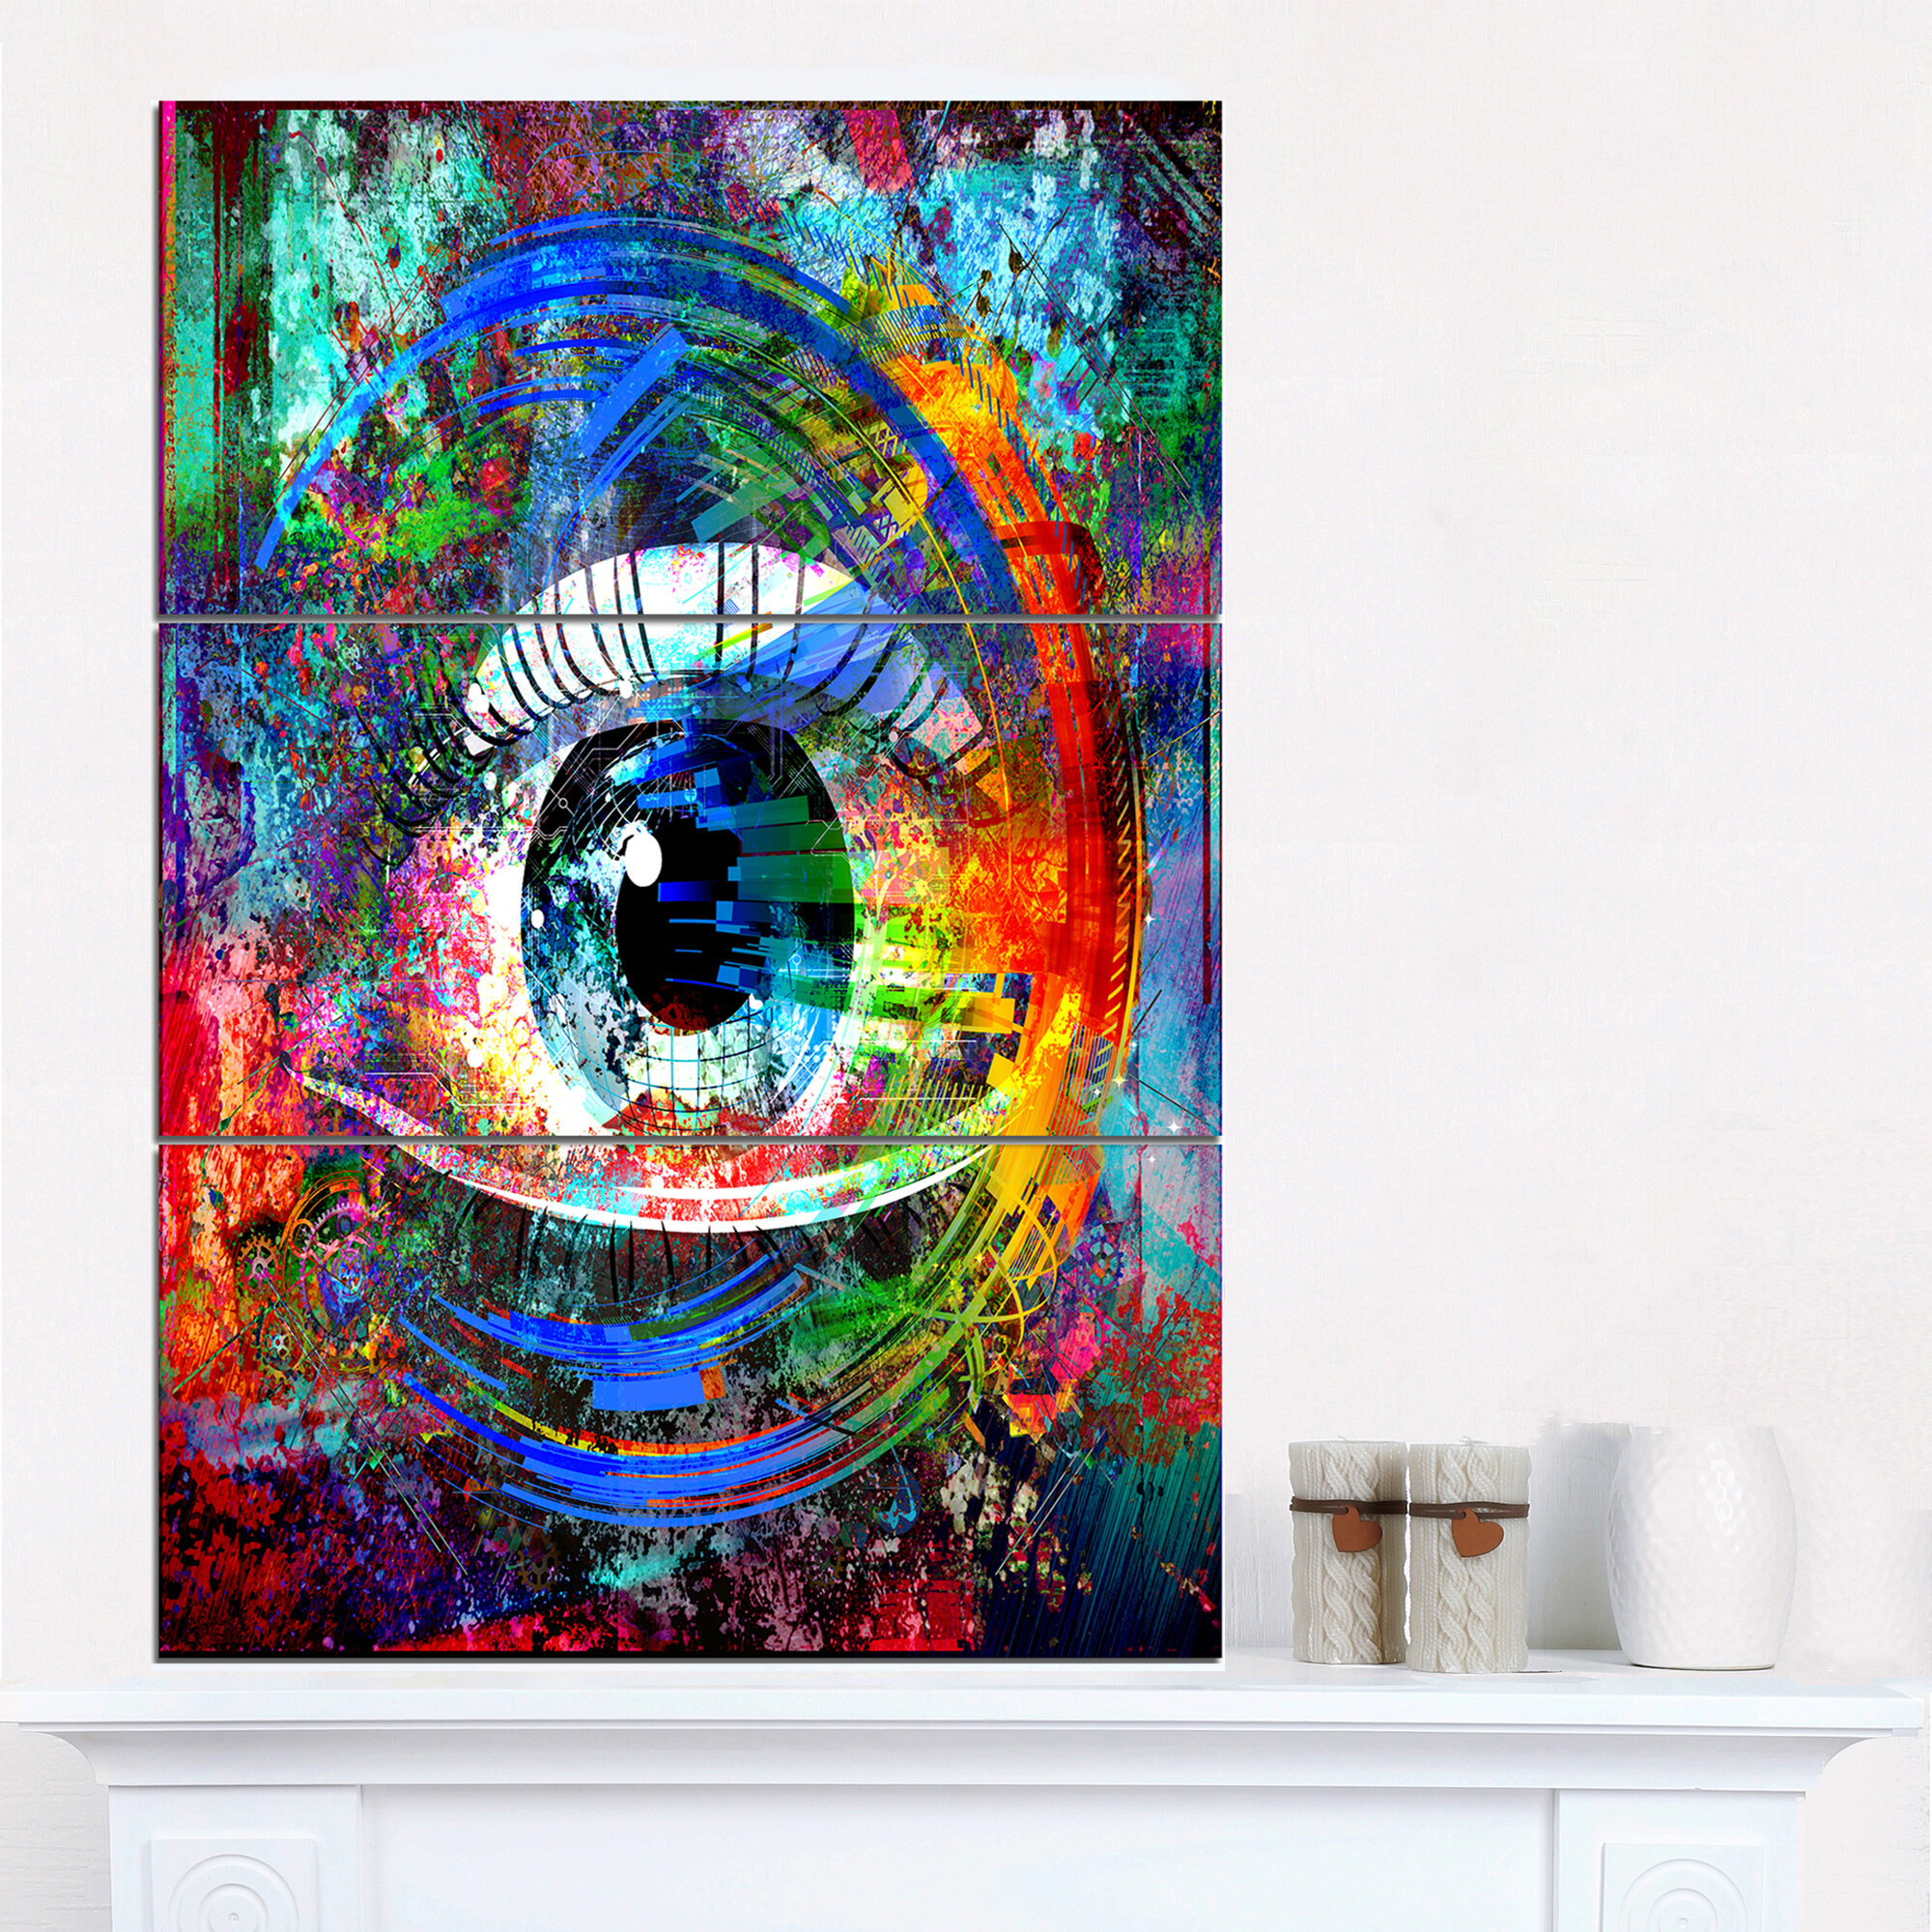 Magic Eye Over Abstract Design On Canvas 3 Pieces Print